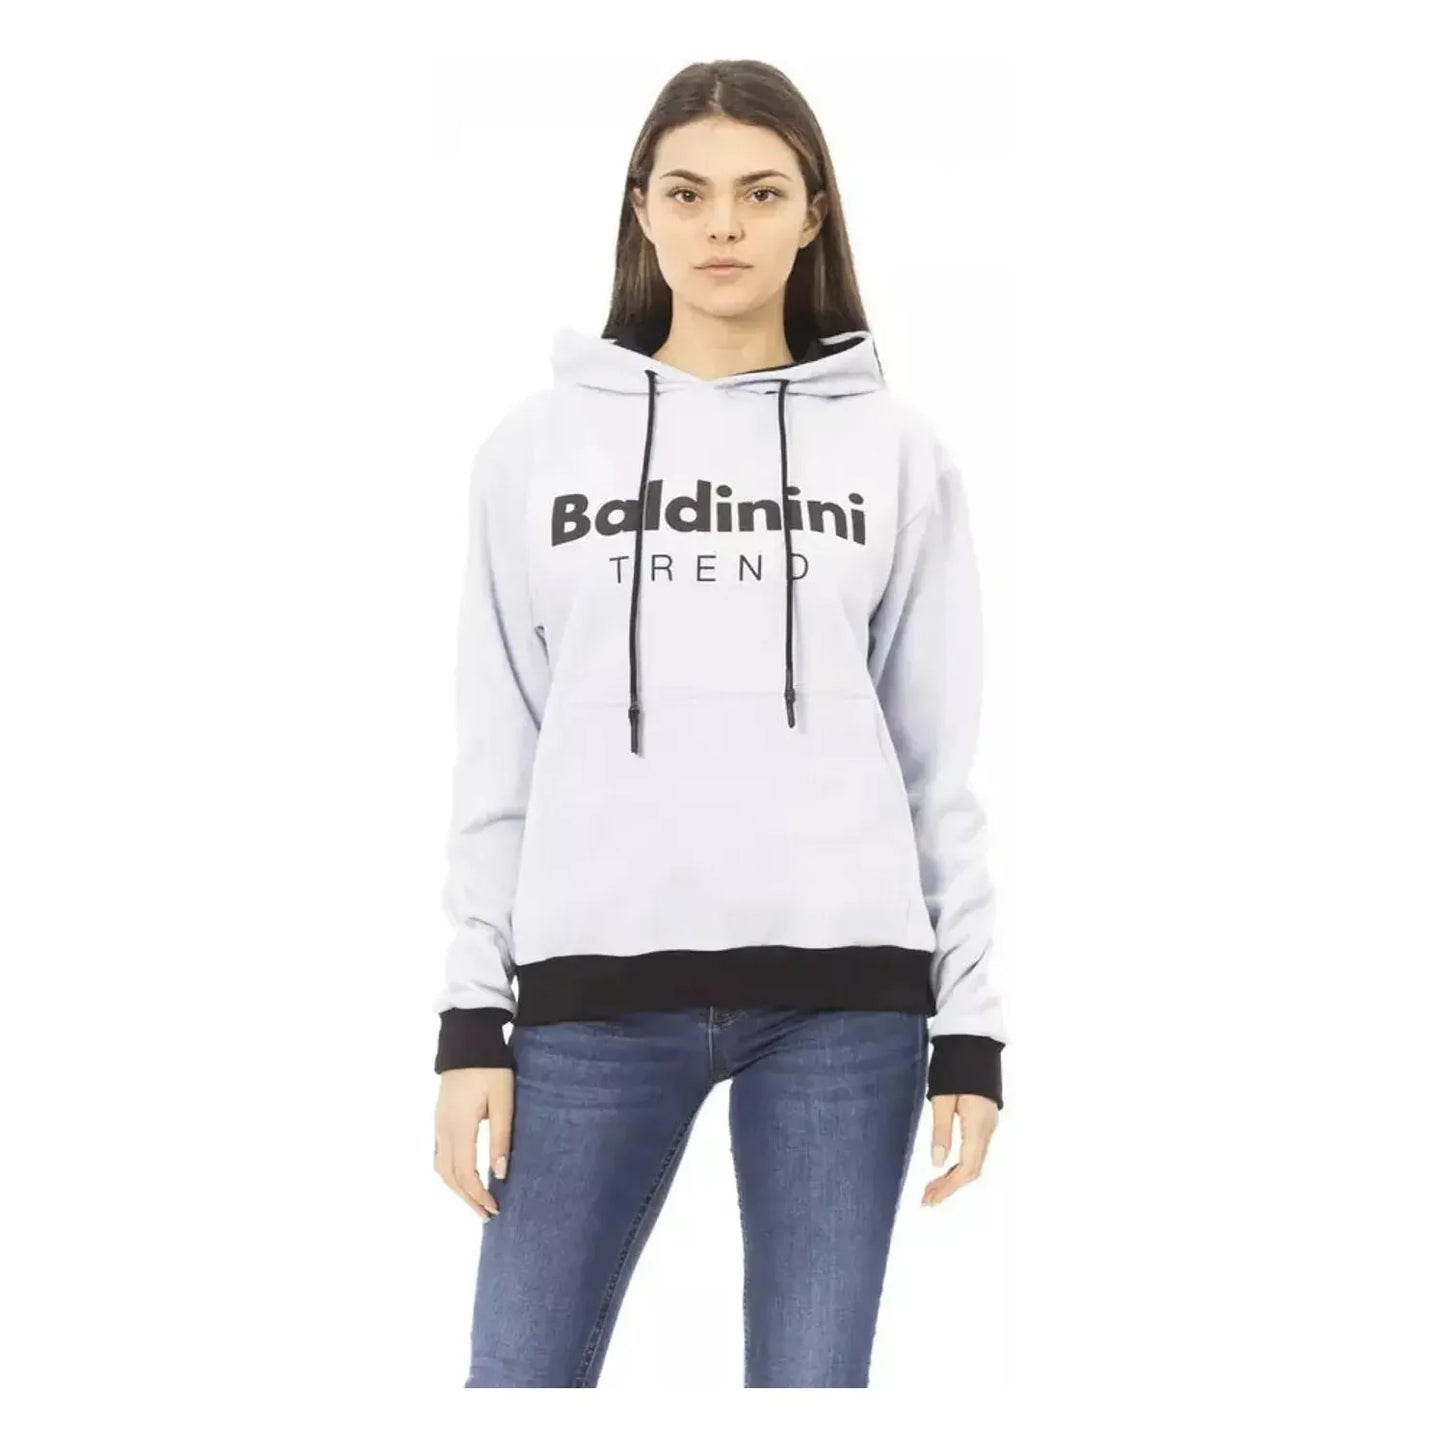 Baldinini Trend Chic White Cotton Fleece Hoodie with Front Logo white-cotton-sweater-11 product-22526-1887639128-30-b730f148-4a9.webp